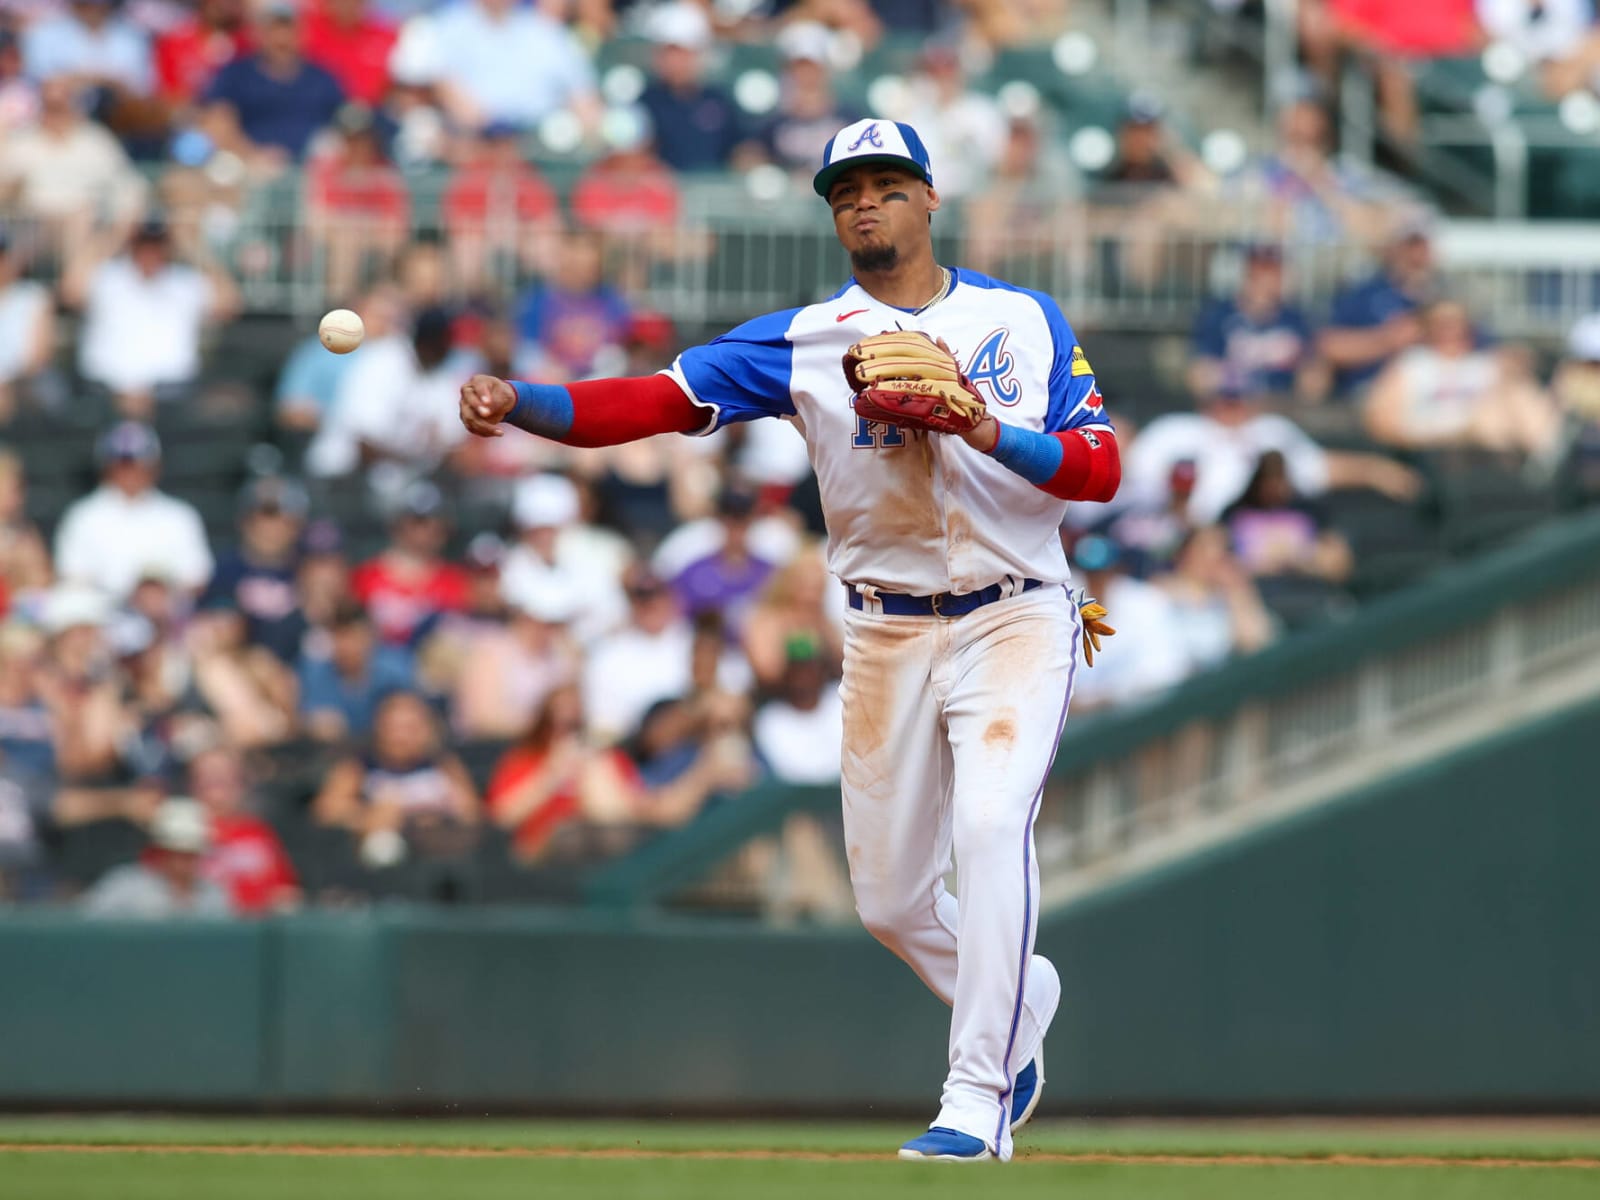 The Orlando Arcia breakout campaign showing no signs of slowing down